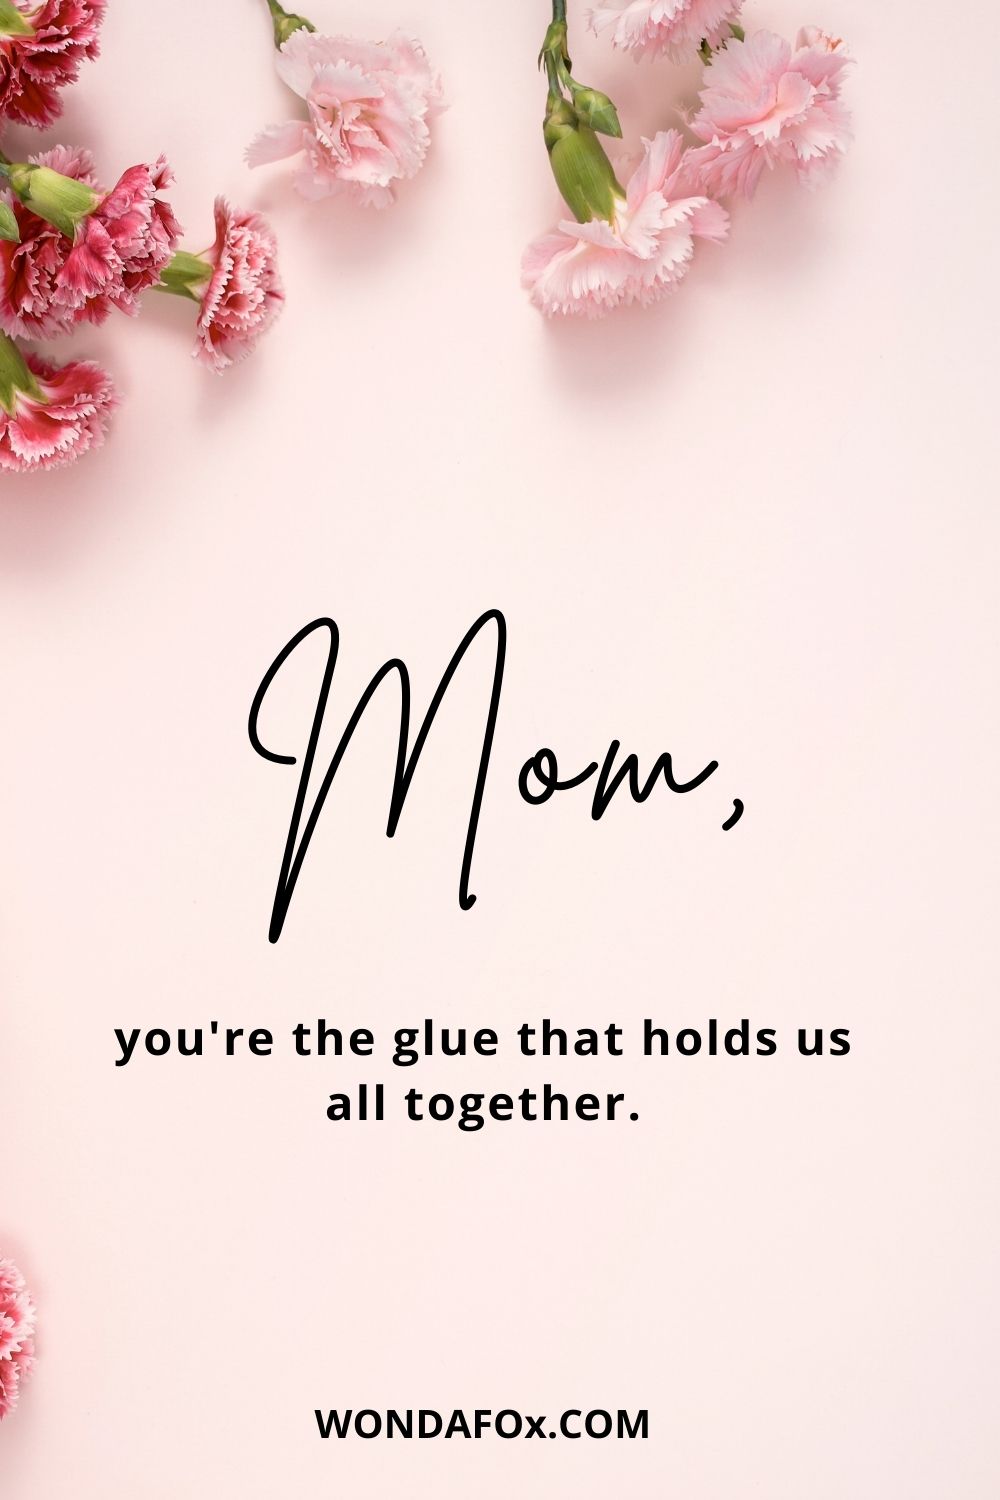 Mom, you're the glue that holds us all together.